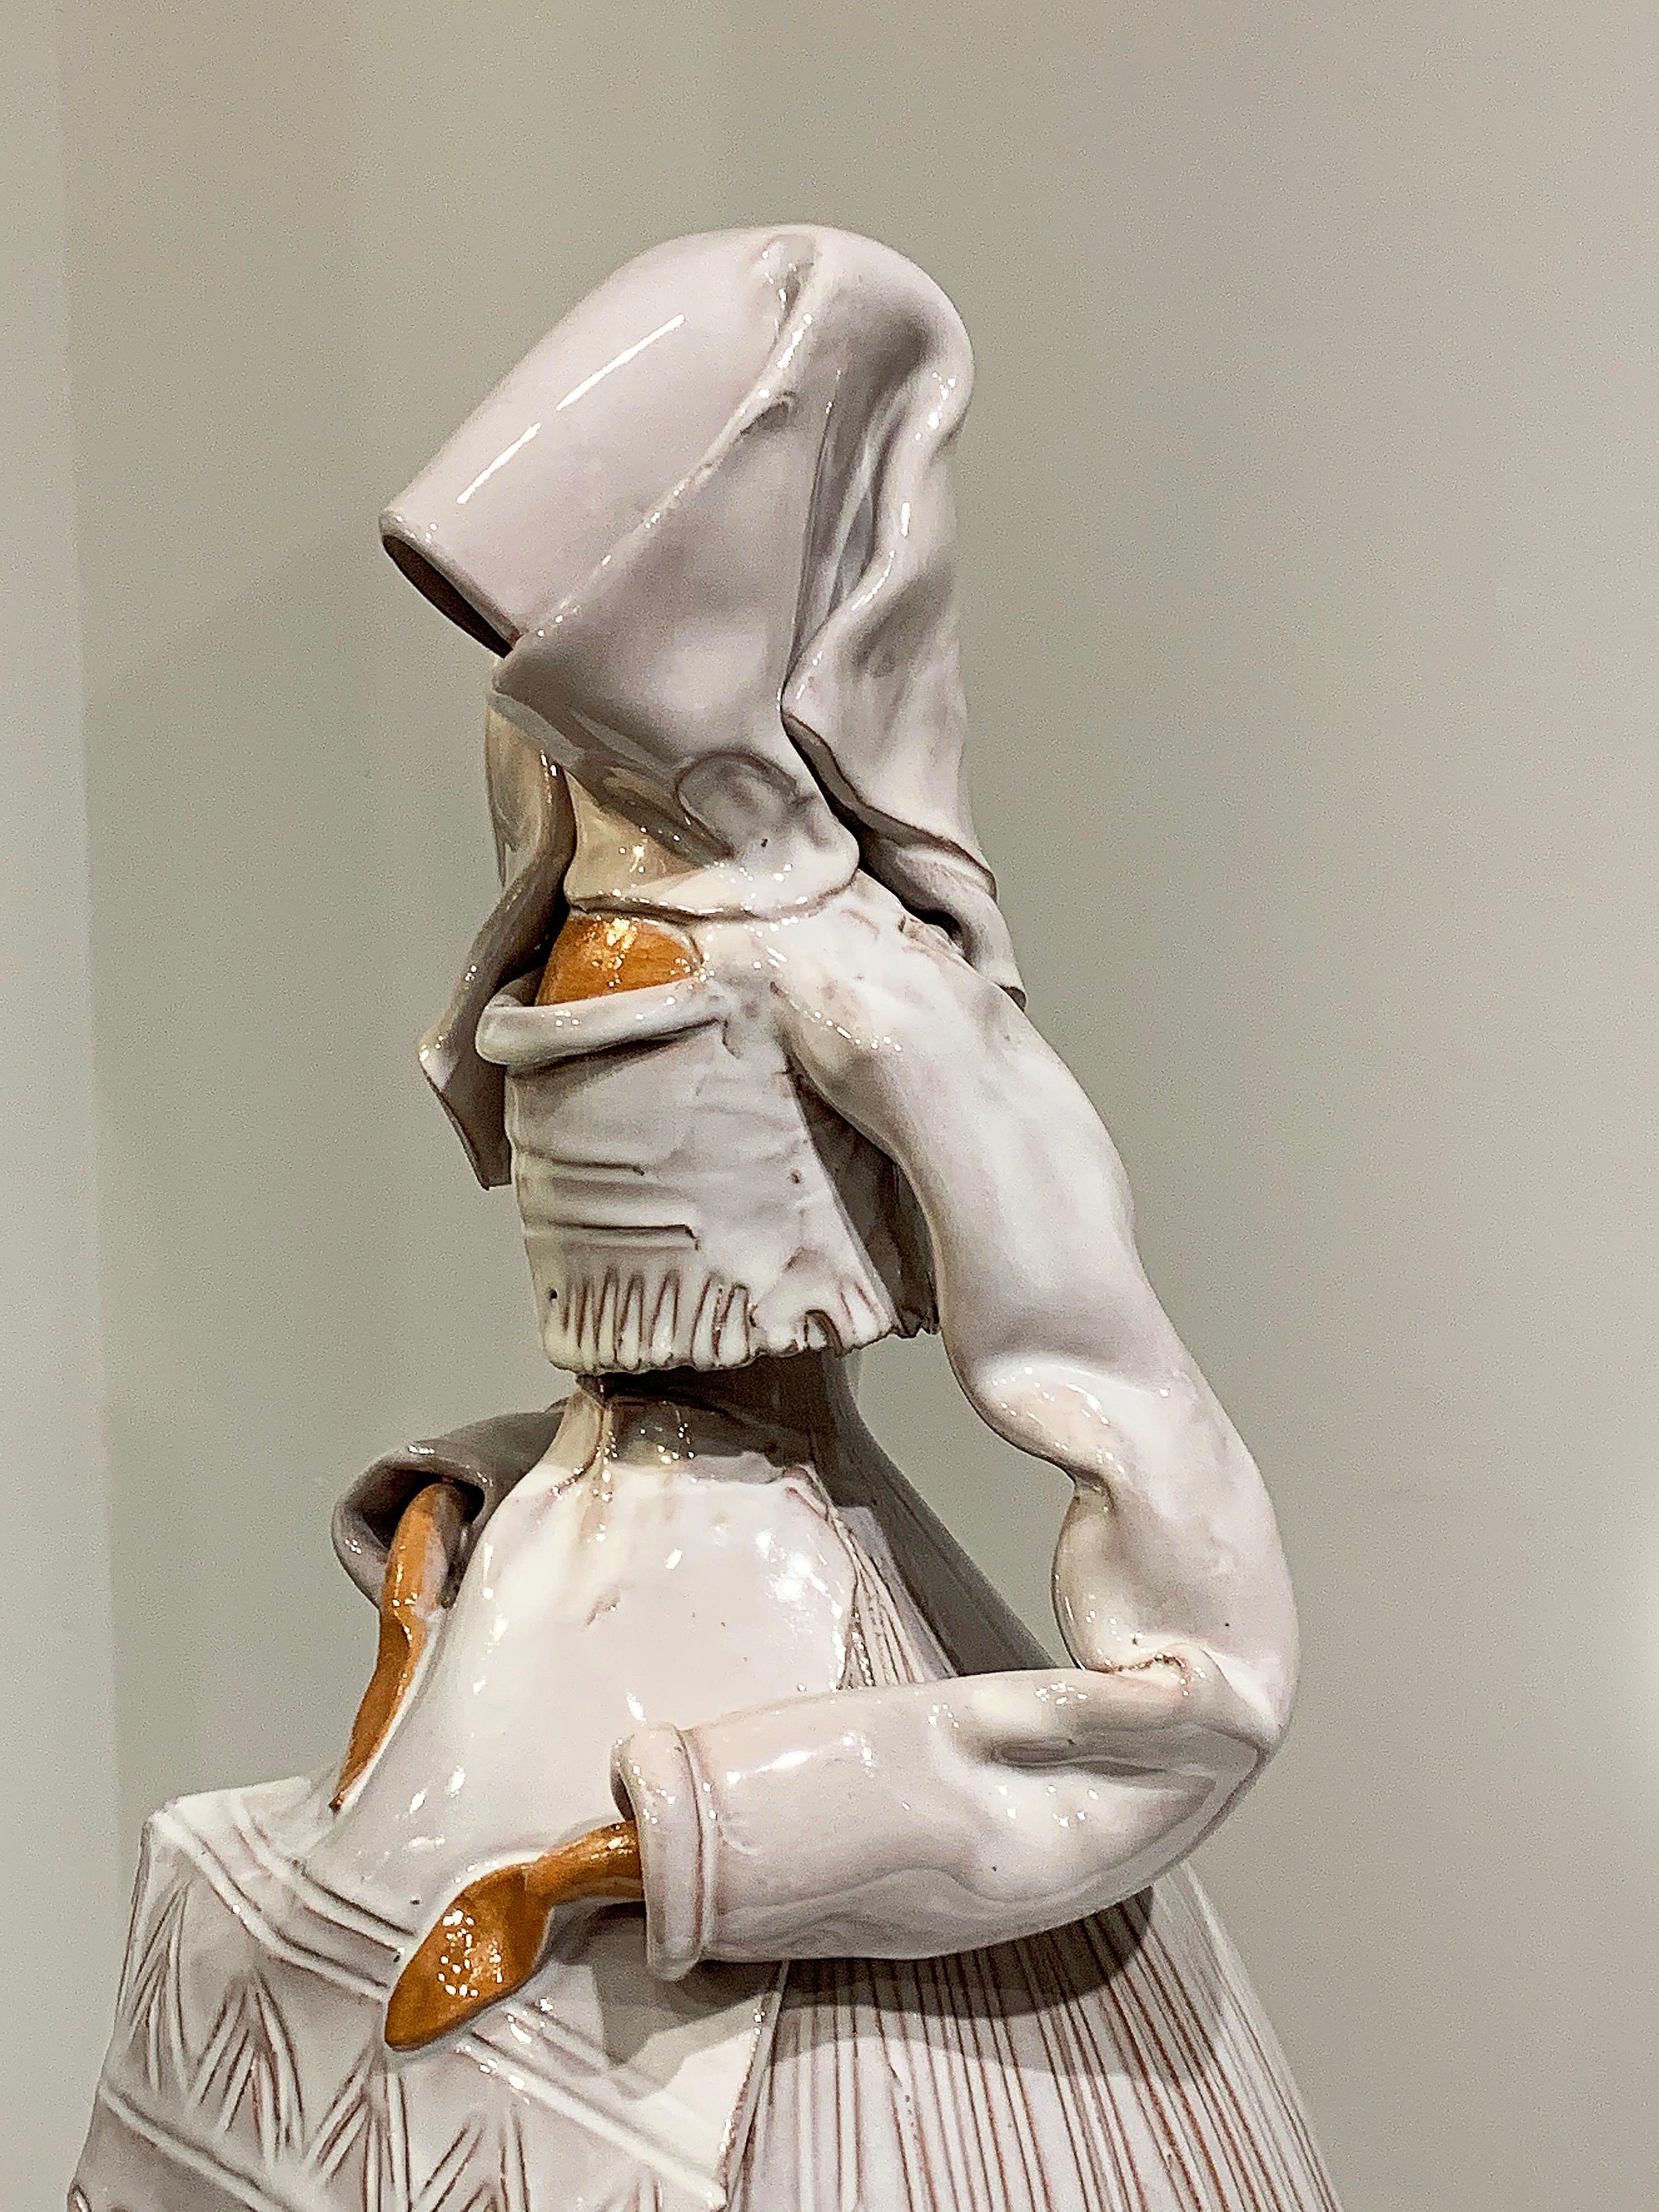 Veiled ceramic female sculpture. This sculpture is meticulously done and her look is very intriguing. The dress she wears appears to flow as she walks and much care was taken to make the ceramic look like textile. Her head is hidden behind the veil,